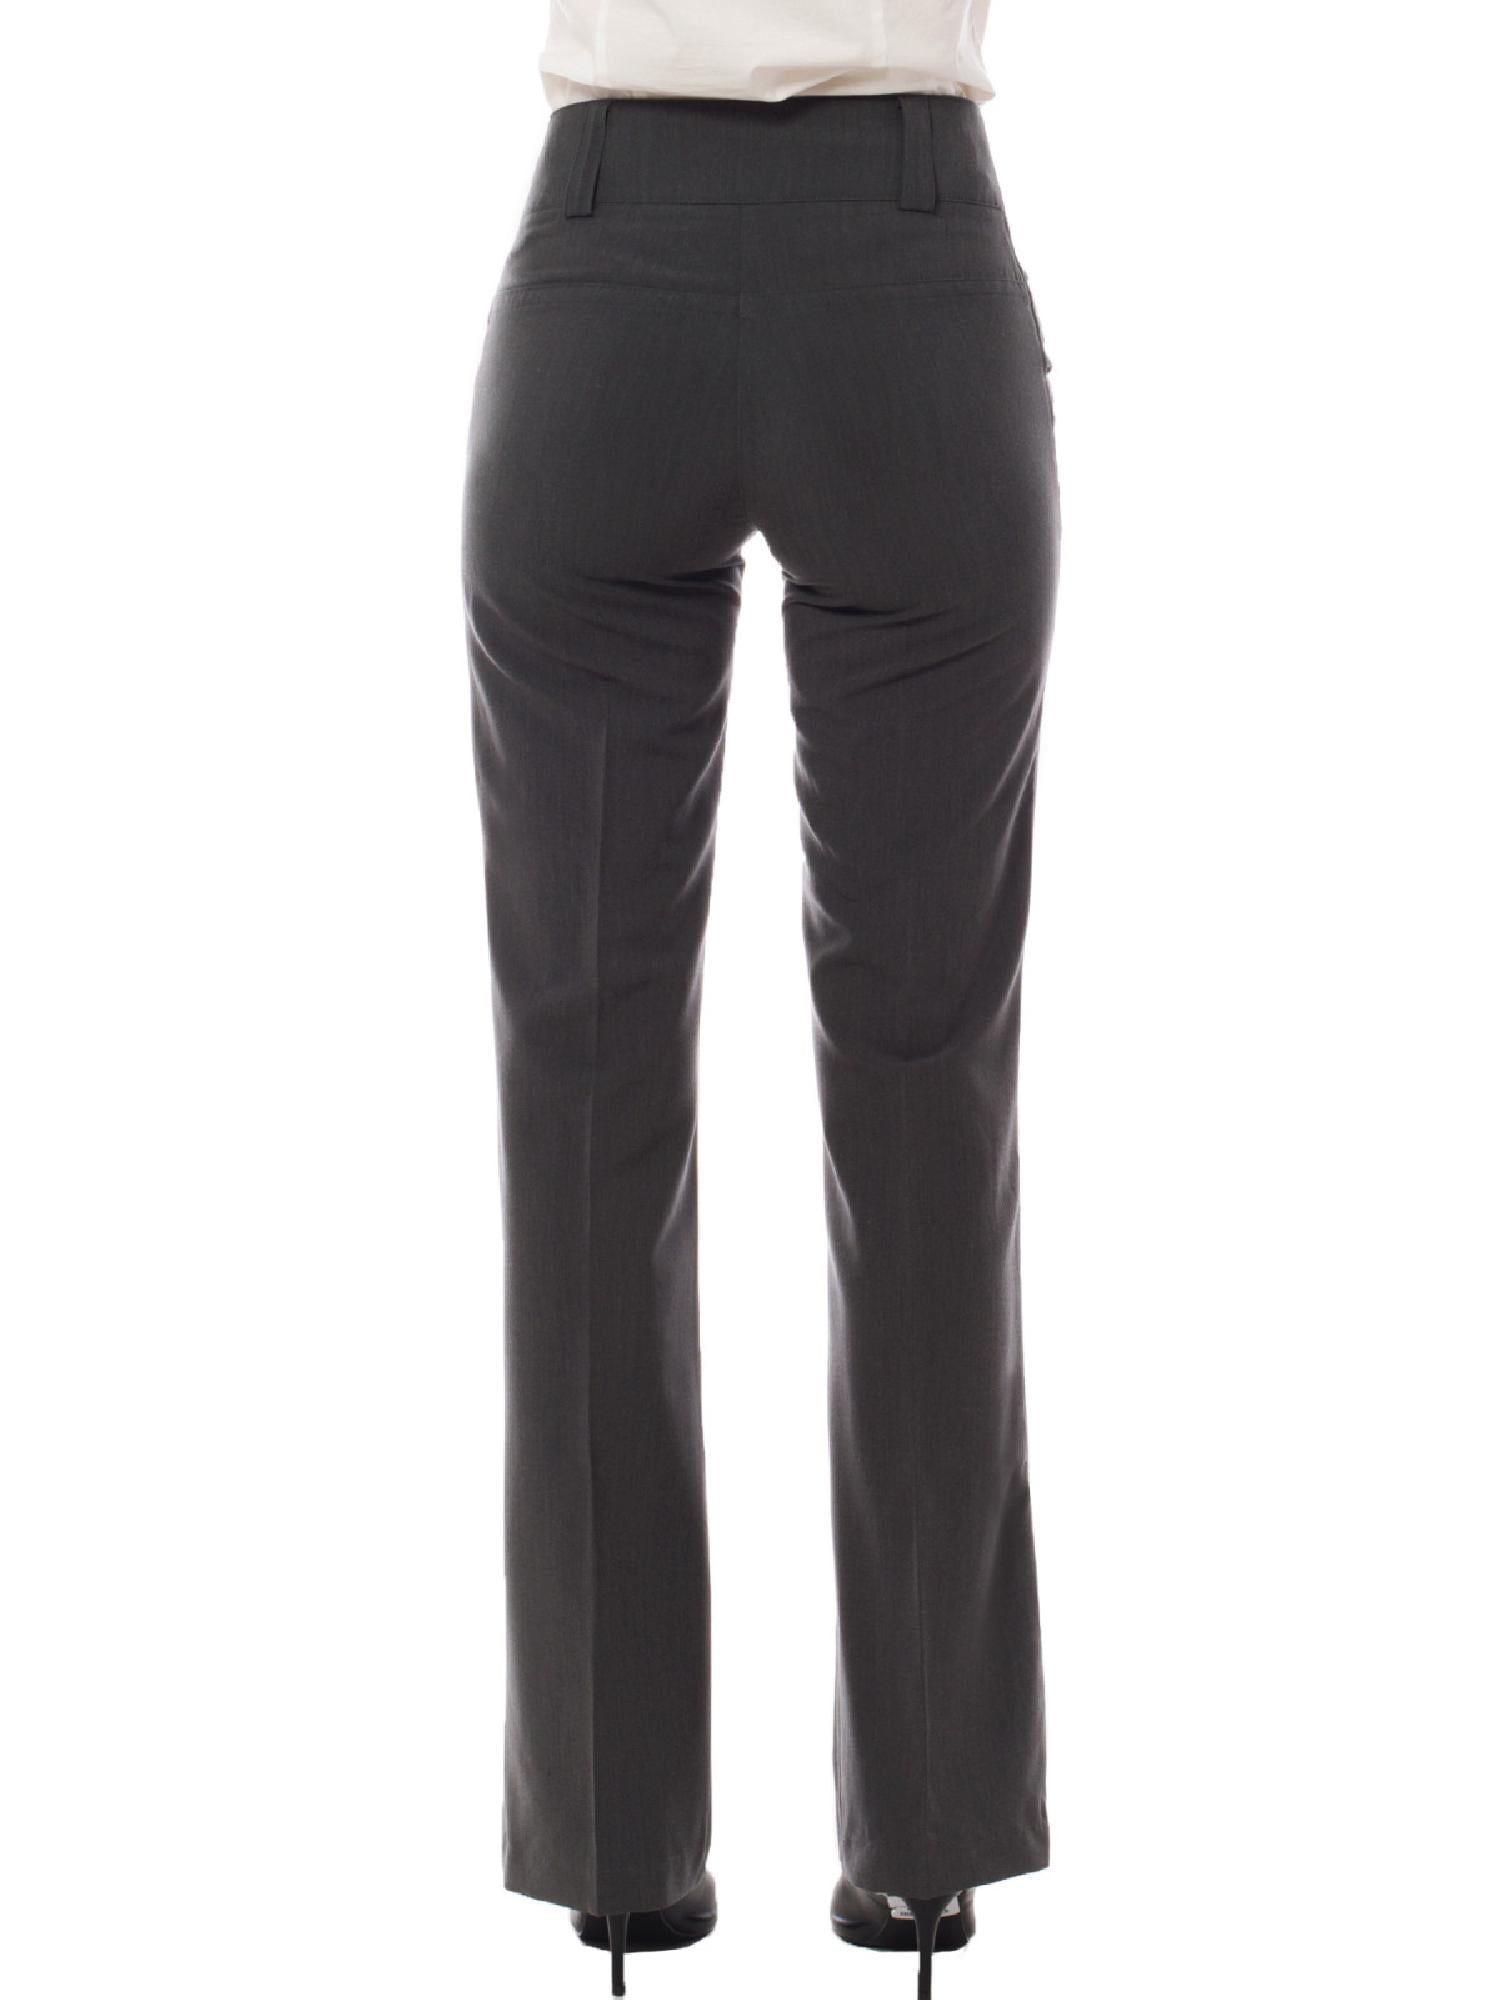 Theory Sincerely Jules Womens Black Pleated Bootcut Dress Pants Size 1 -  Shop Linda's Stuff